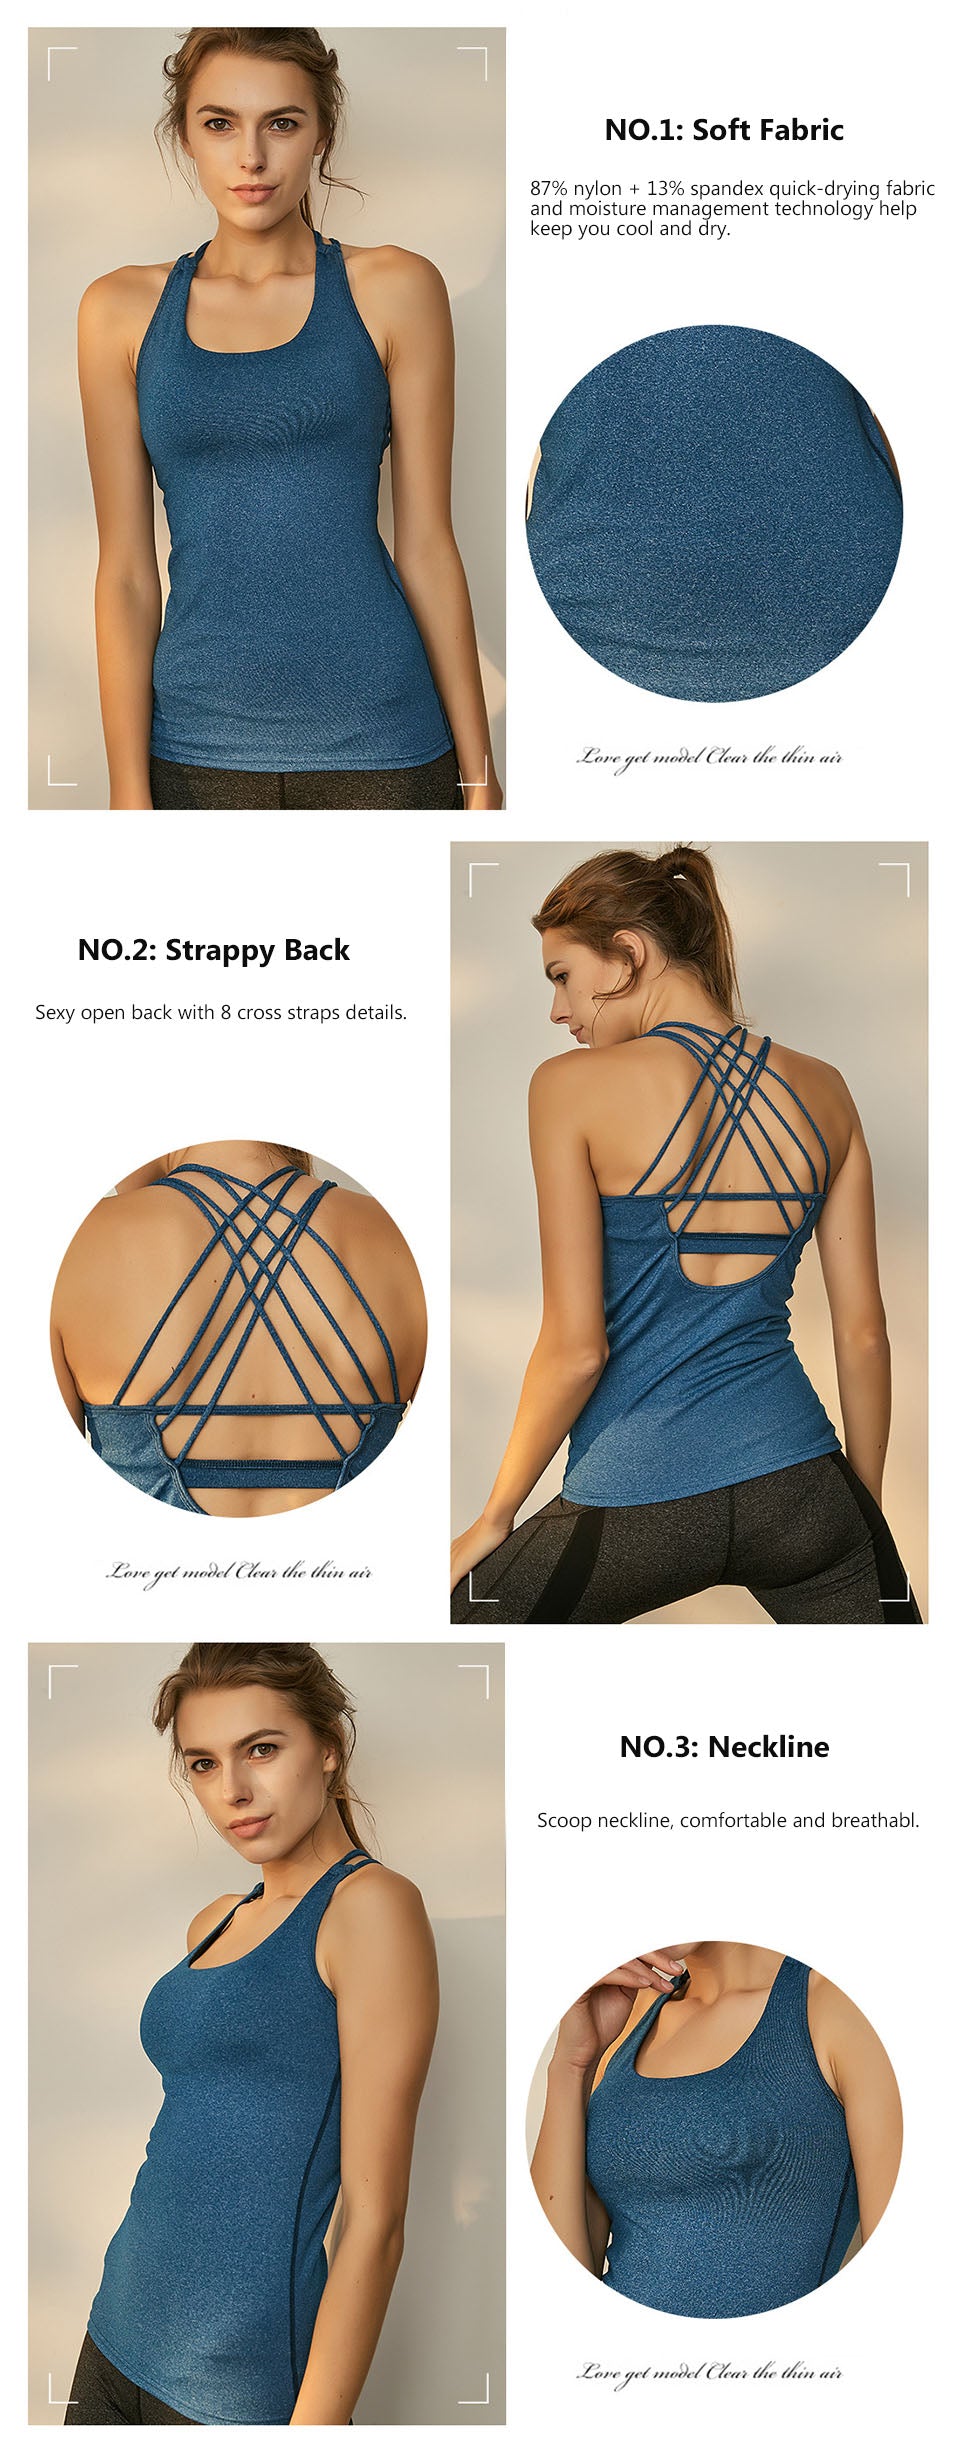 Dry Fit Crisscross Back Strappy Yoga Tops Blue Wourkout Clothes Activewear Built In Bra Gym Tank Tops For Women Running Shirts - Sheseelady